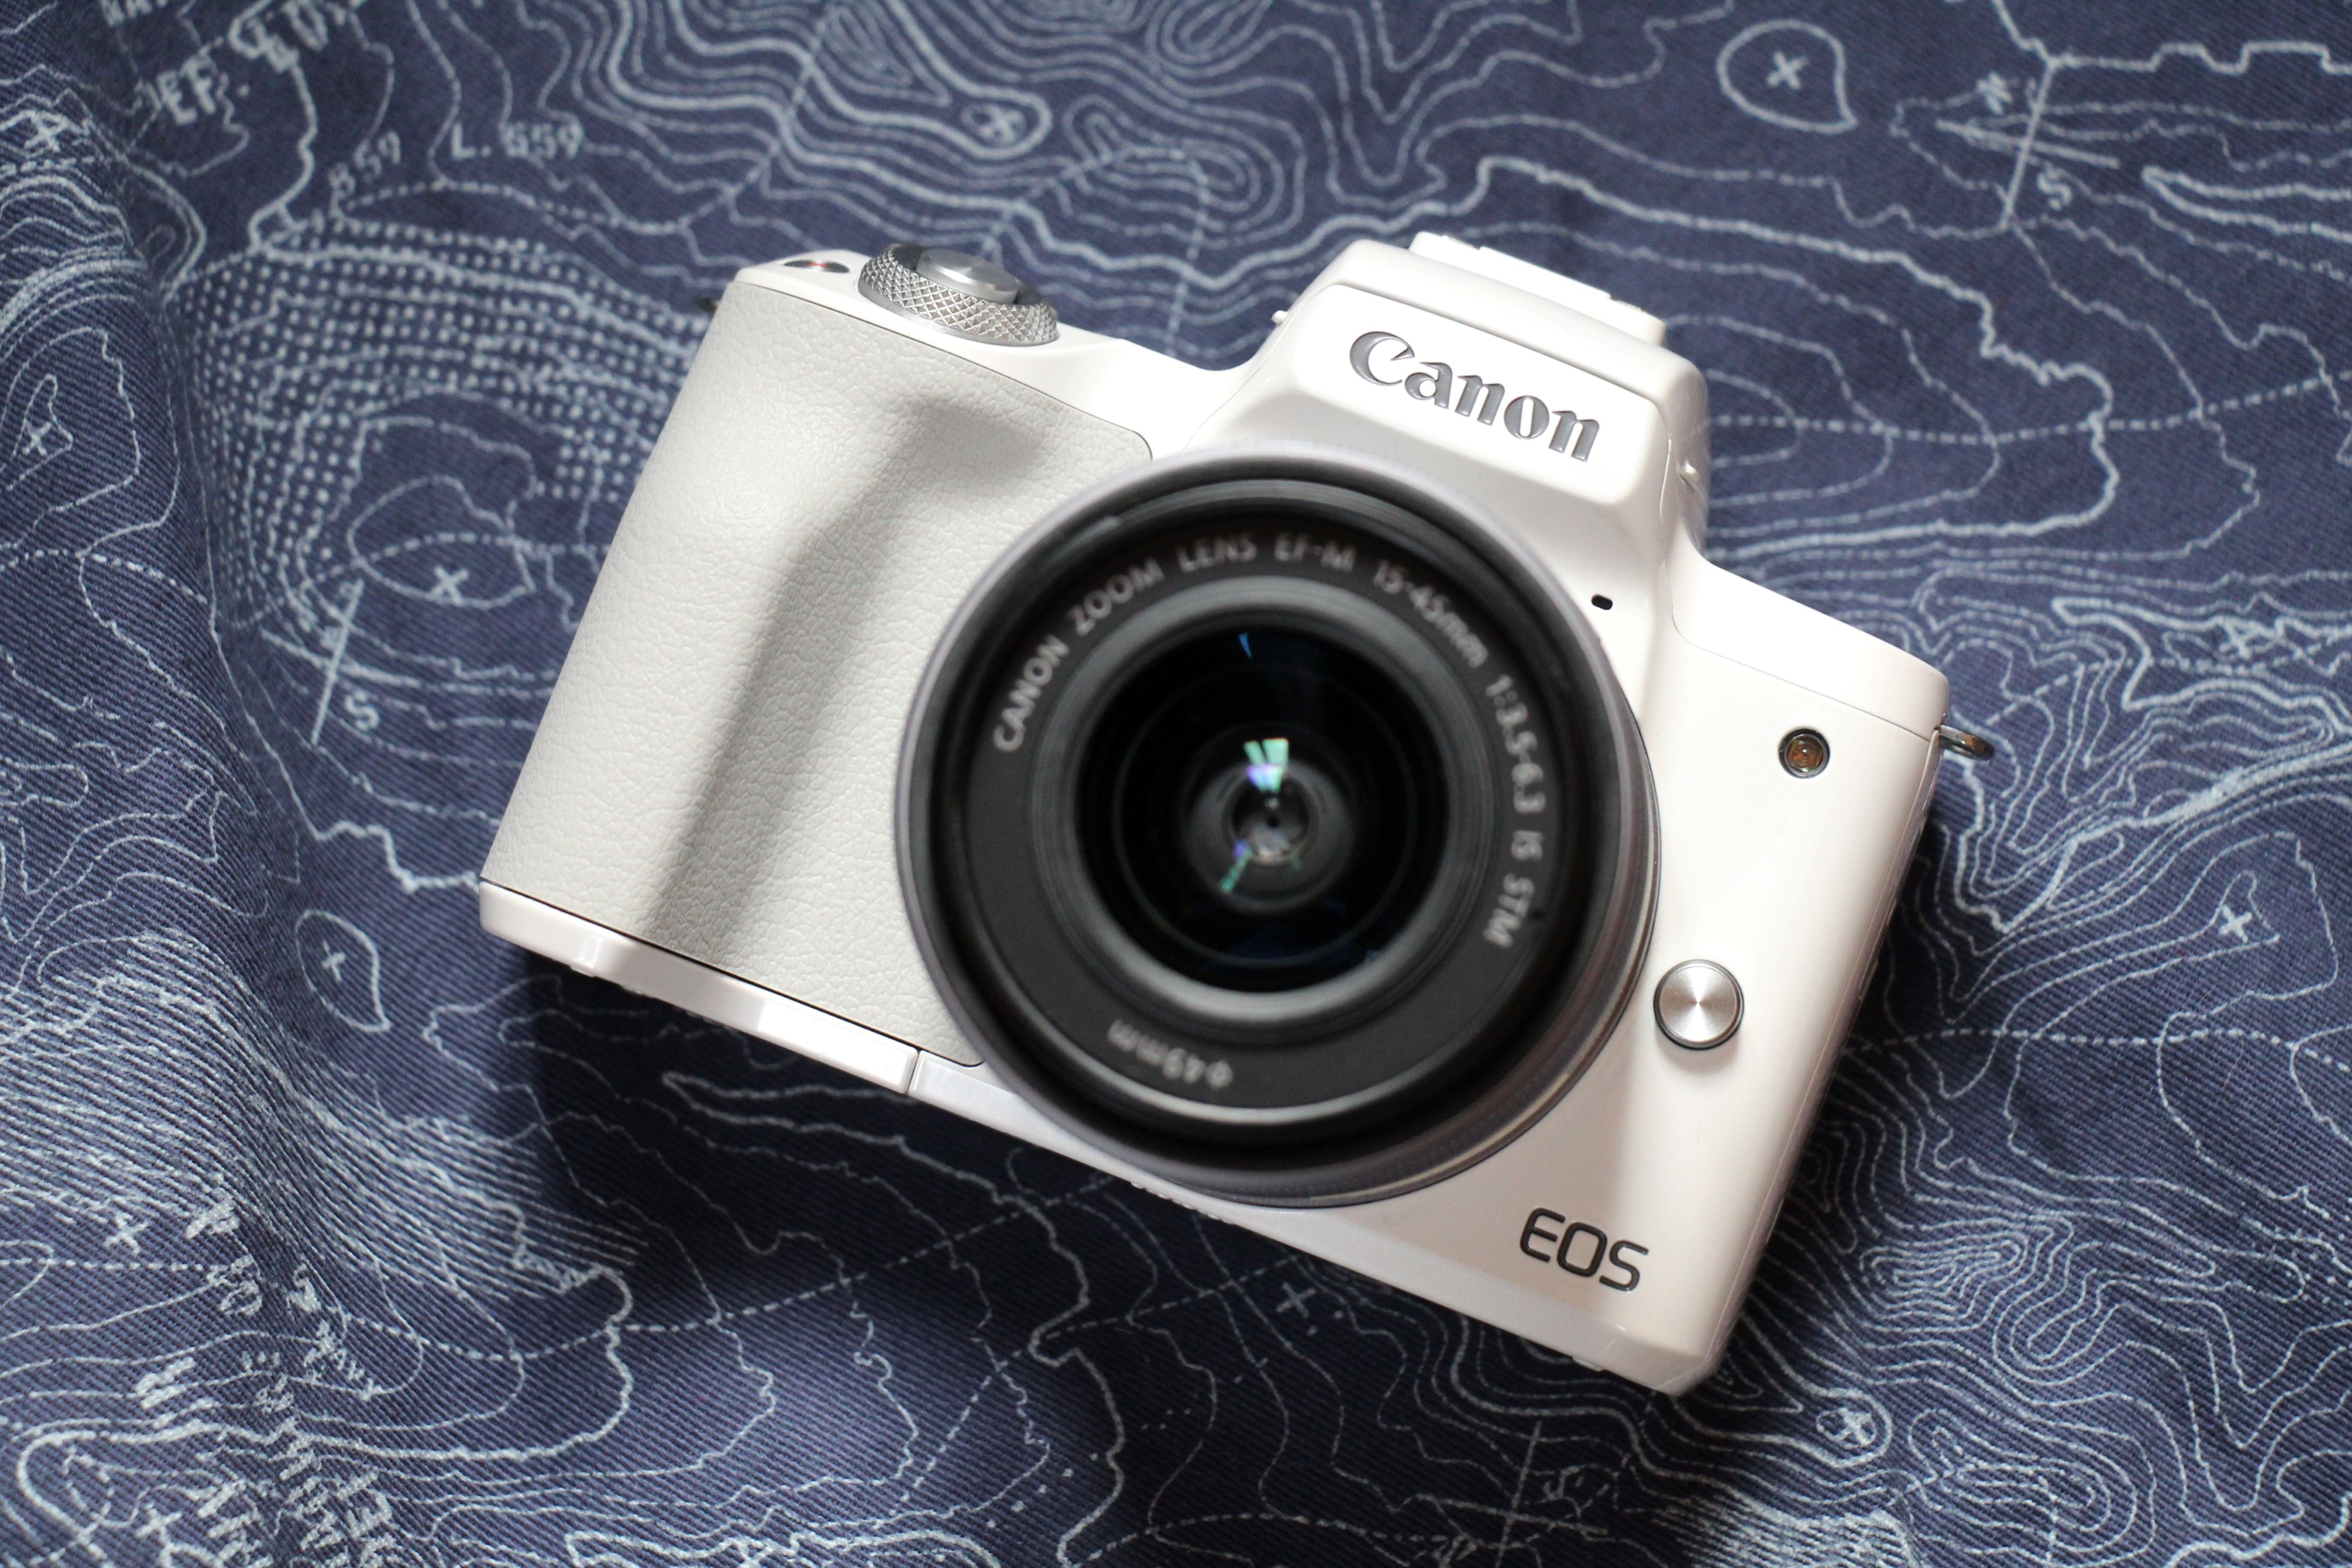 Canon EOS M50 Review